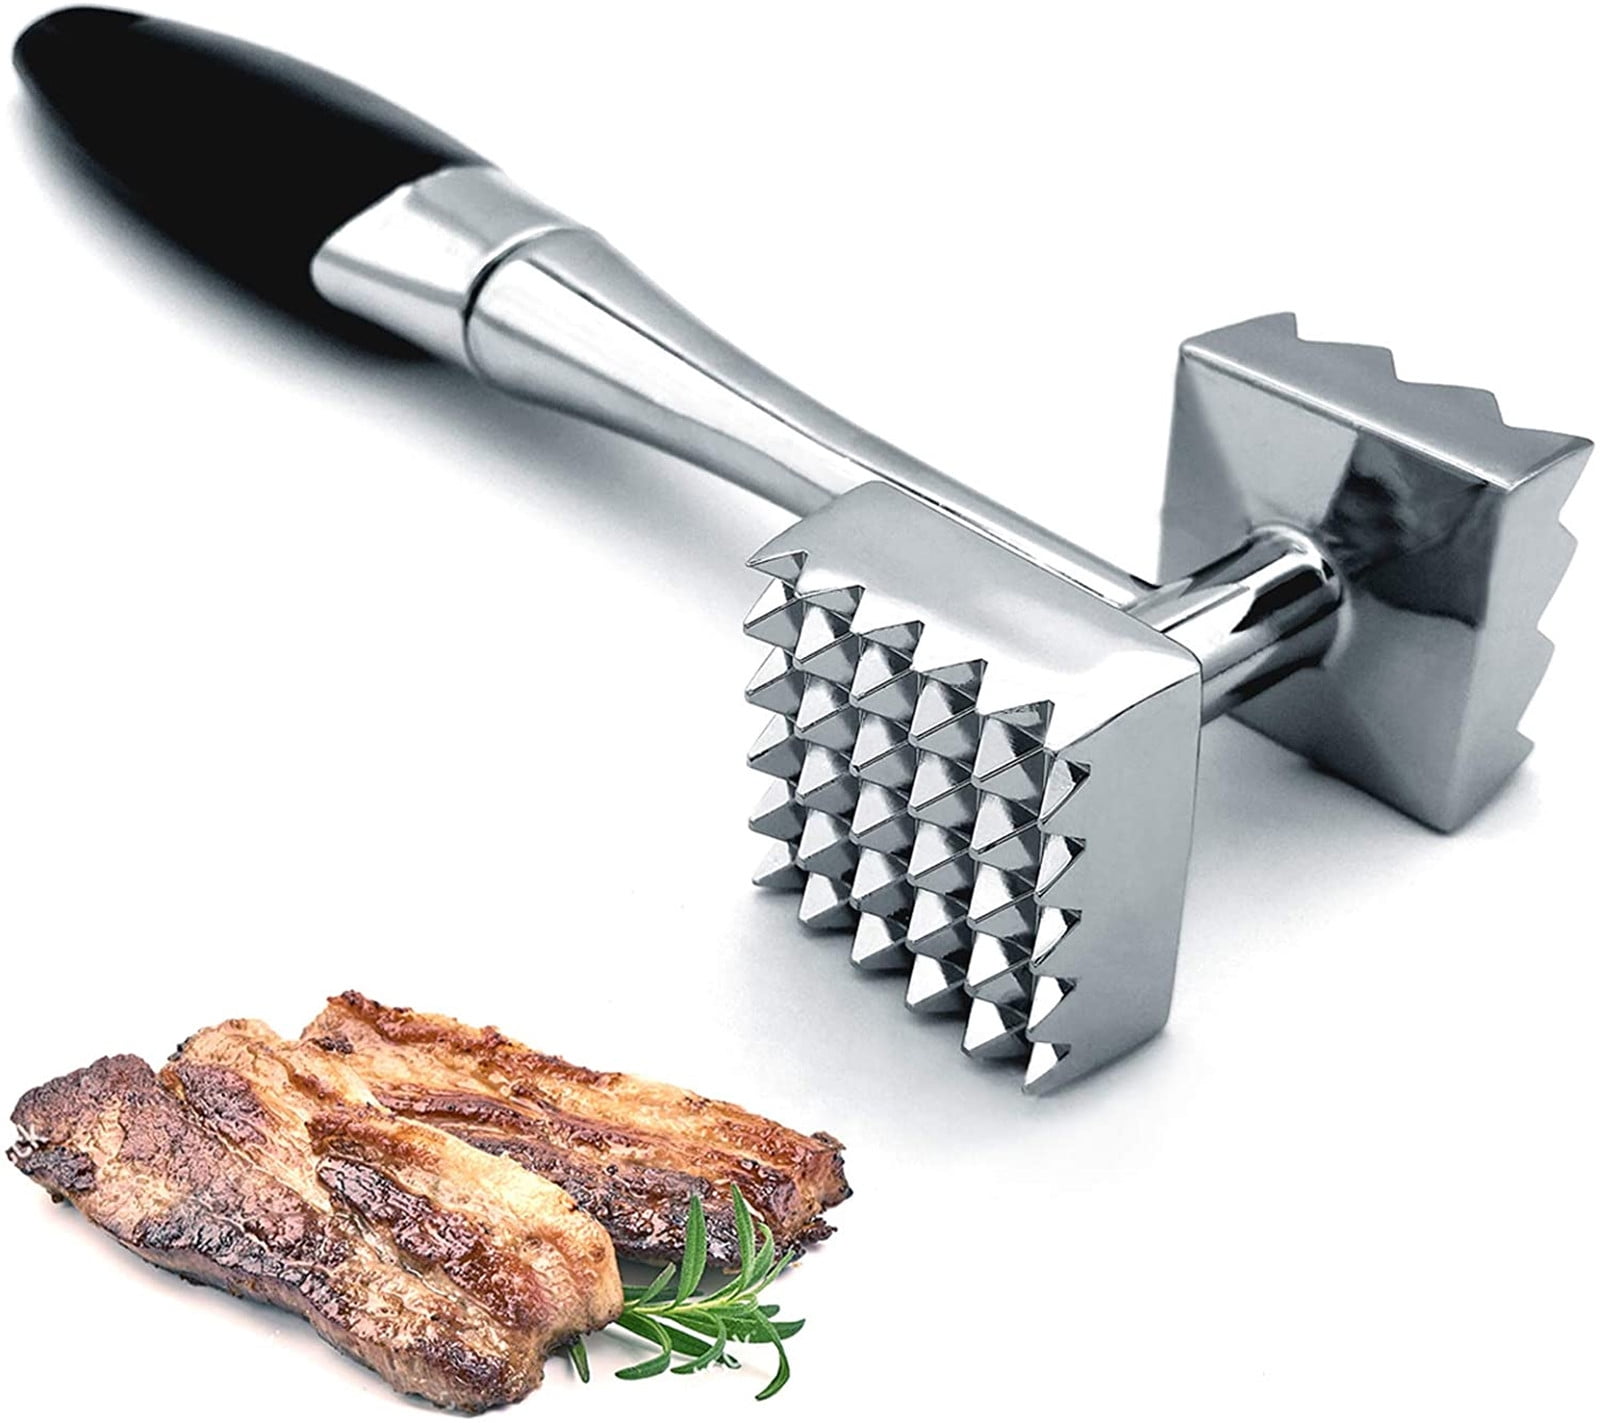 Chicken Pounder Meat Smasher Tool Meat Beater Meat Hammer, Food Mallet  Stainless Steel Tenderizer Dual Sided Meat Mallet for Home Kitchen Tool  Cooking